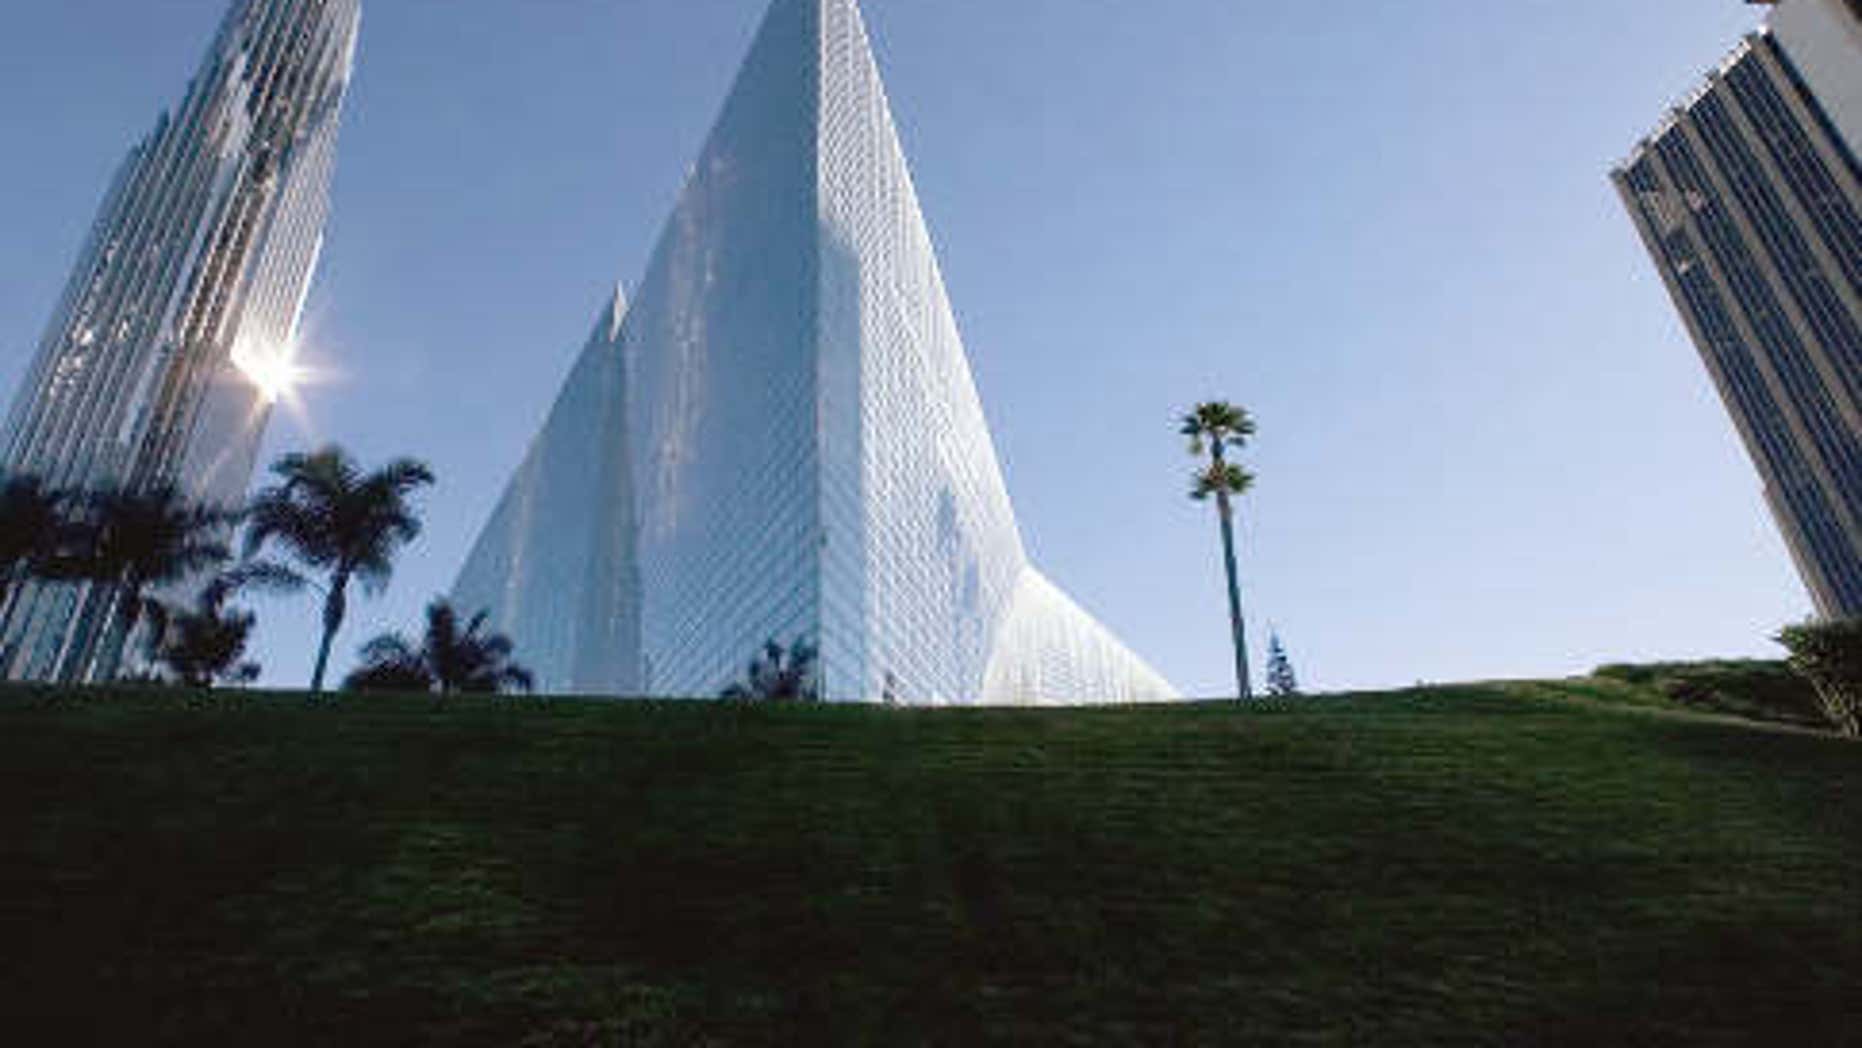 California Megachurch Crystal Cathedral Gets New Name As It